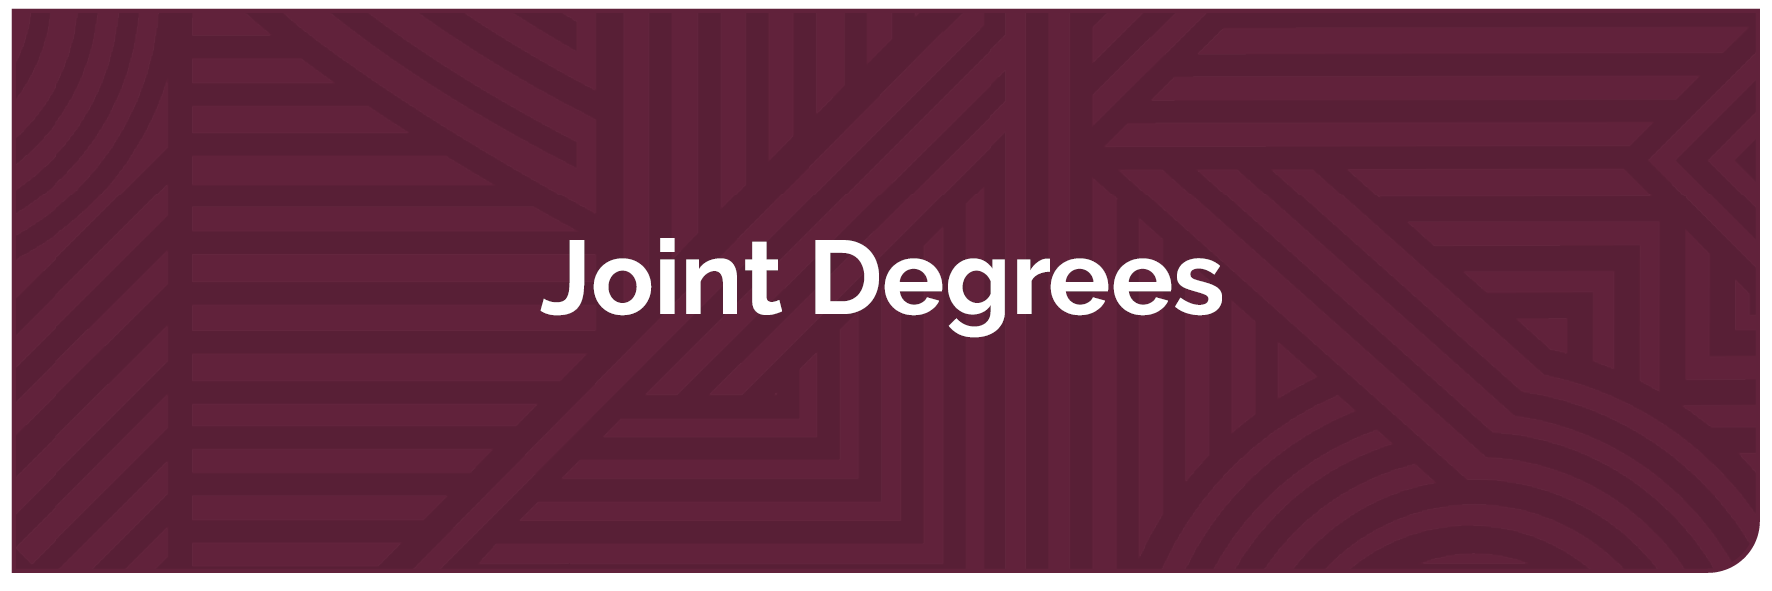 Joint Degrees banner.png